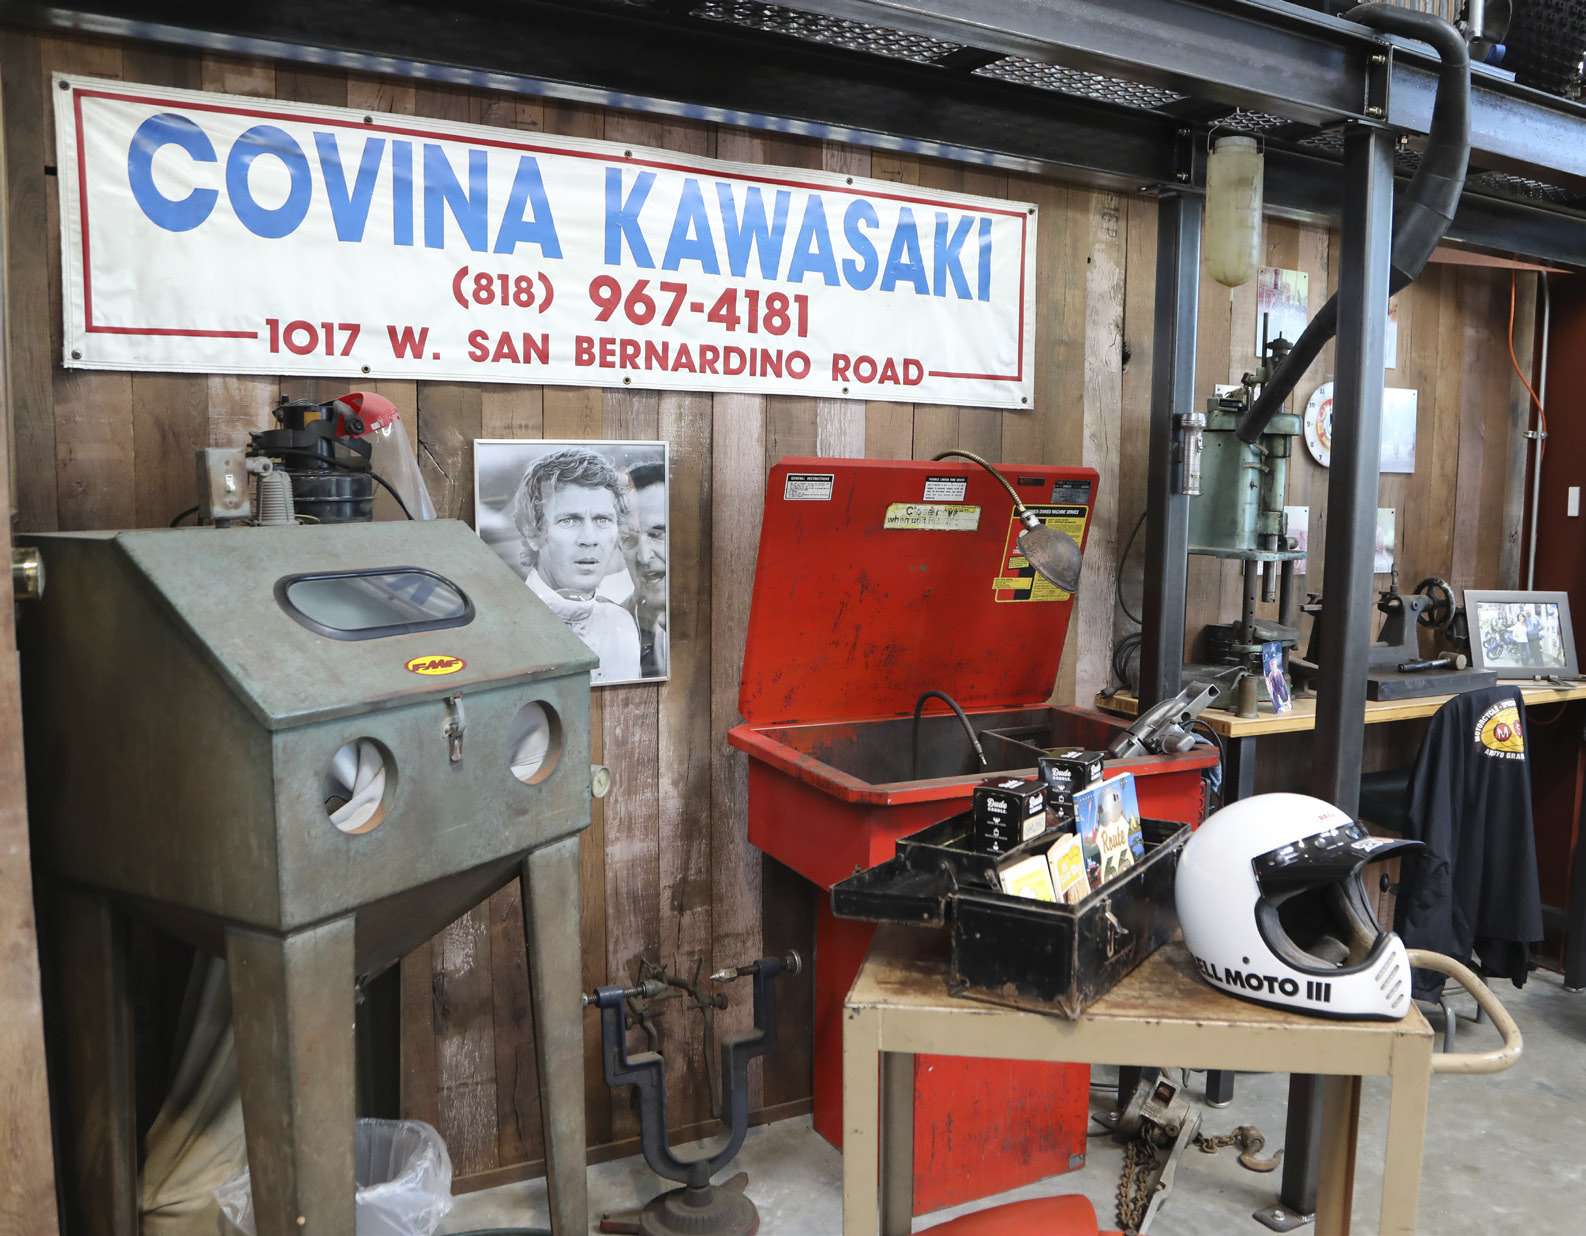 In his personal shop and collection, Cottrell has an area replicating his dad’s original motorcycle repair shop